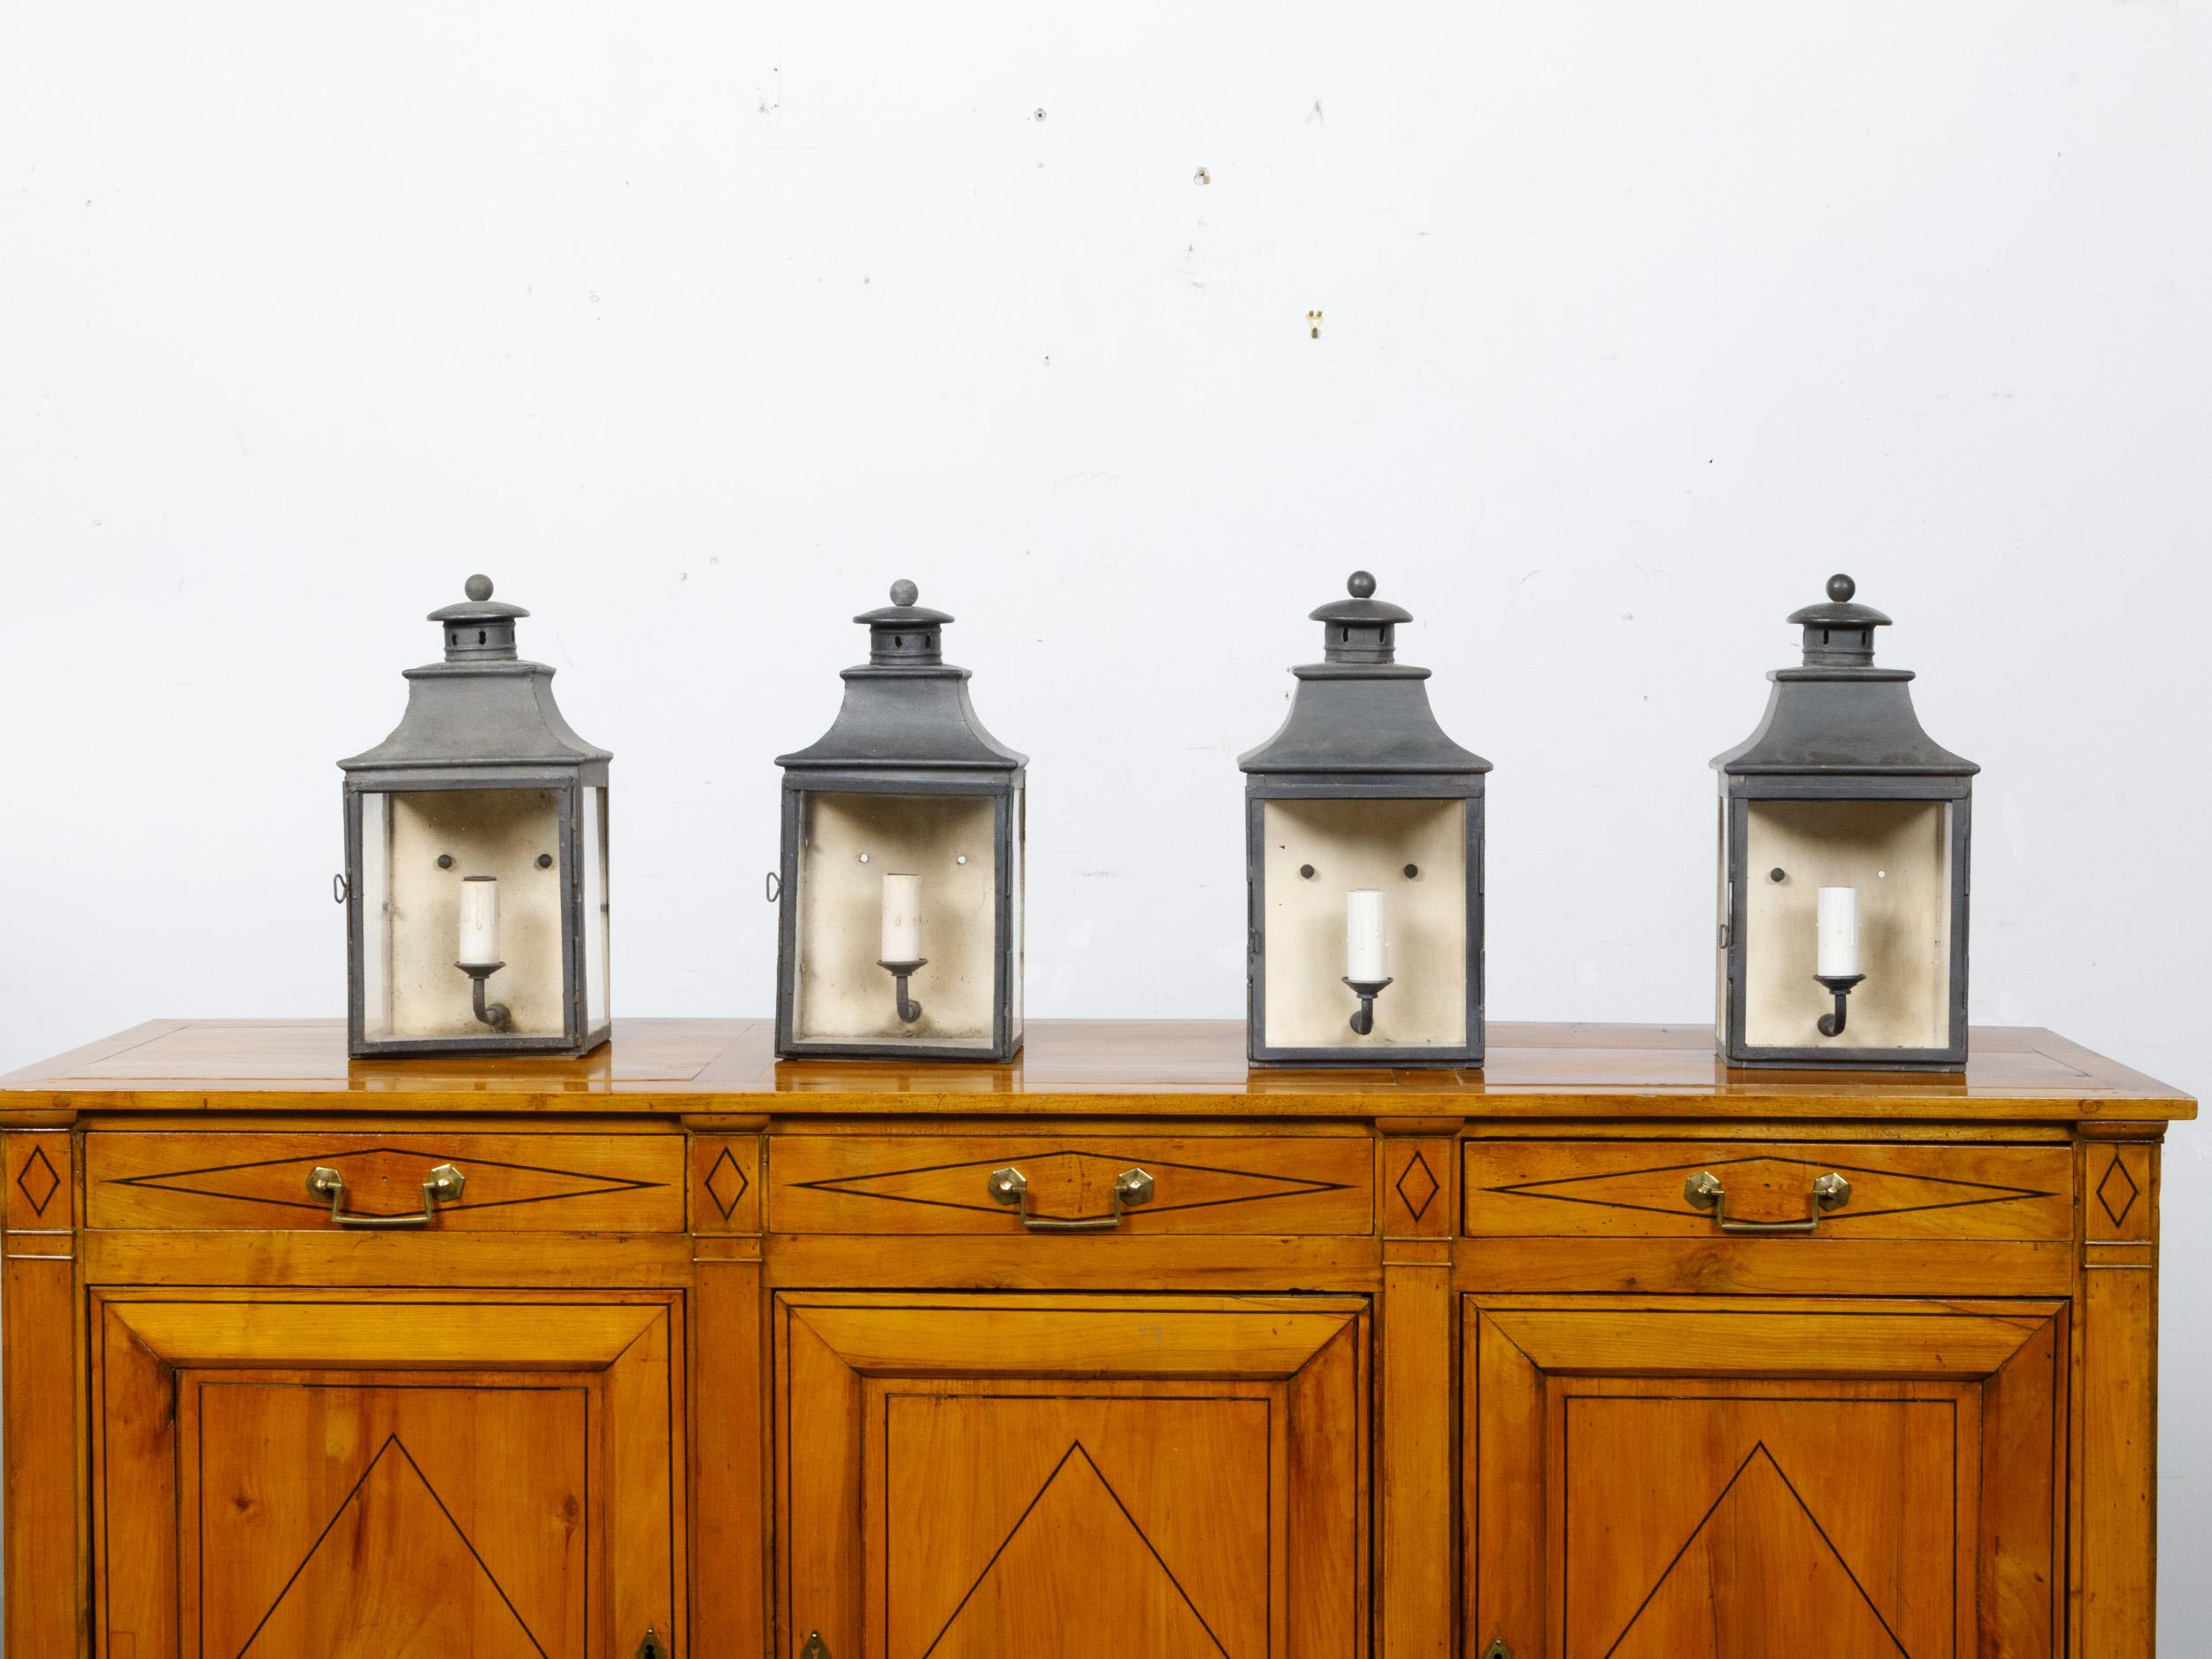 A set of four English Turn of the Century copper wall lanterns from circa 1900 with glass panels and single lights. This set of four English copper wall lanterns, dating back to the turn of the century circa 1900, exudes a timeless charm and a hint